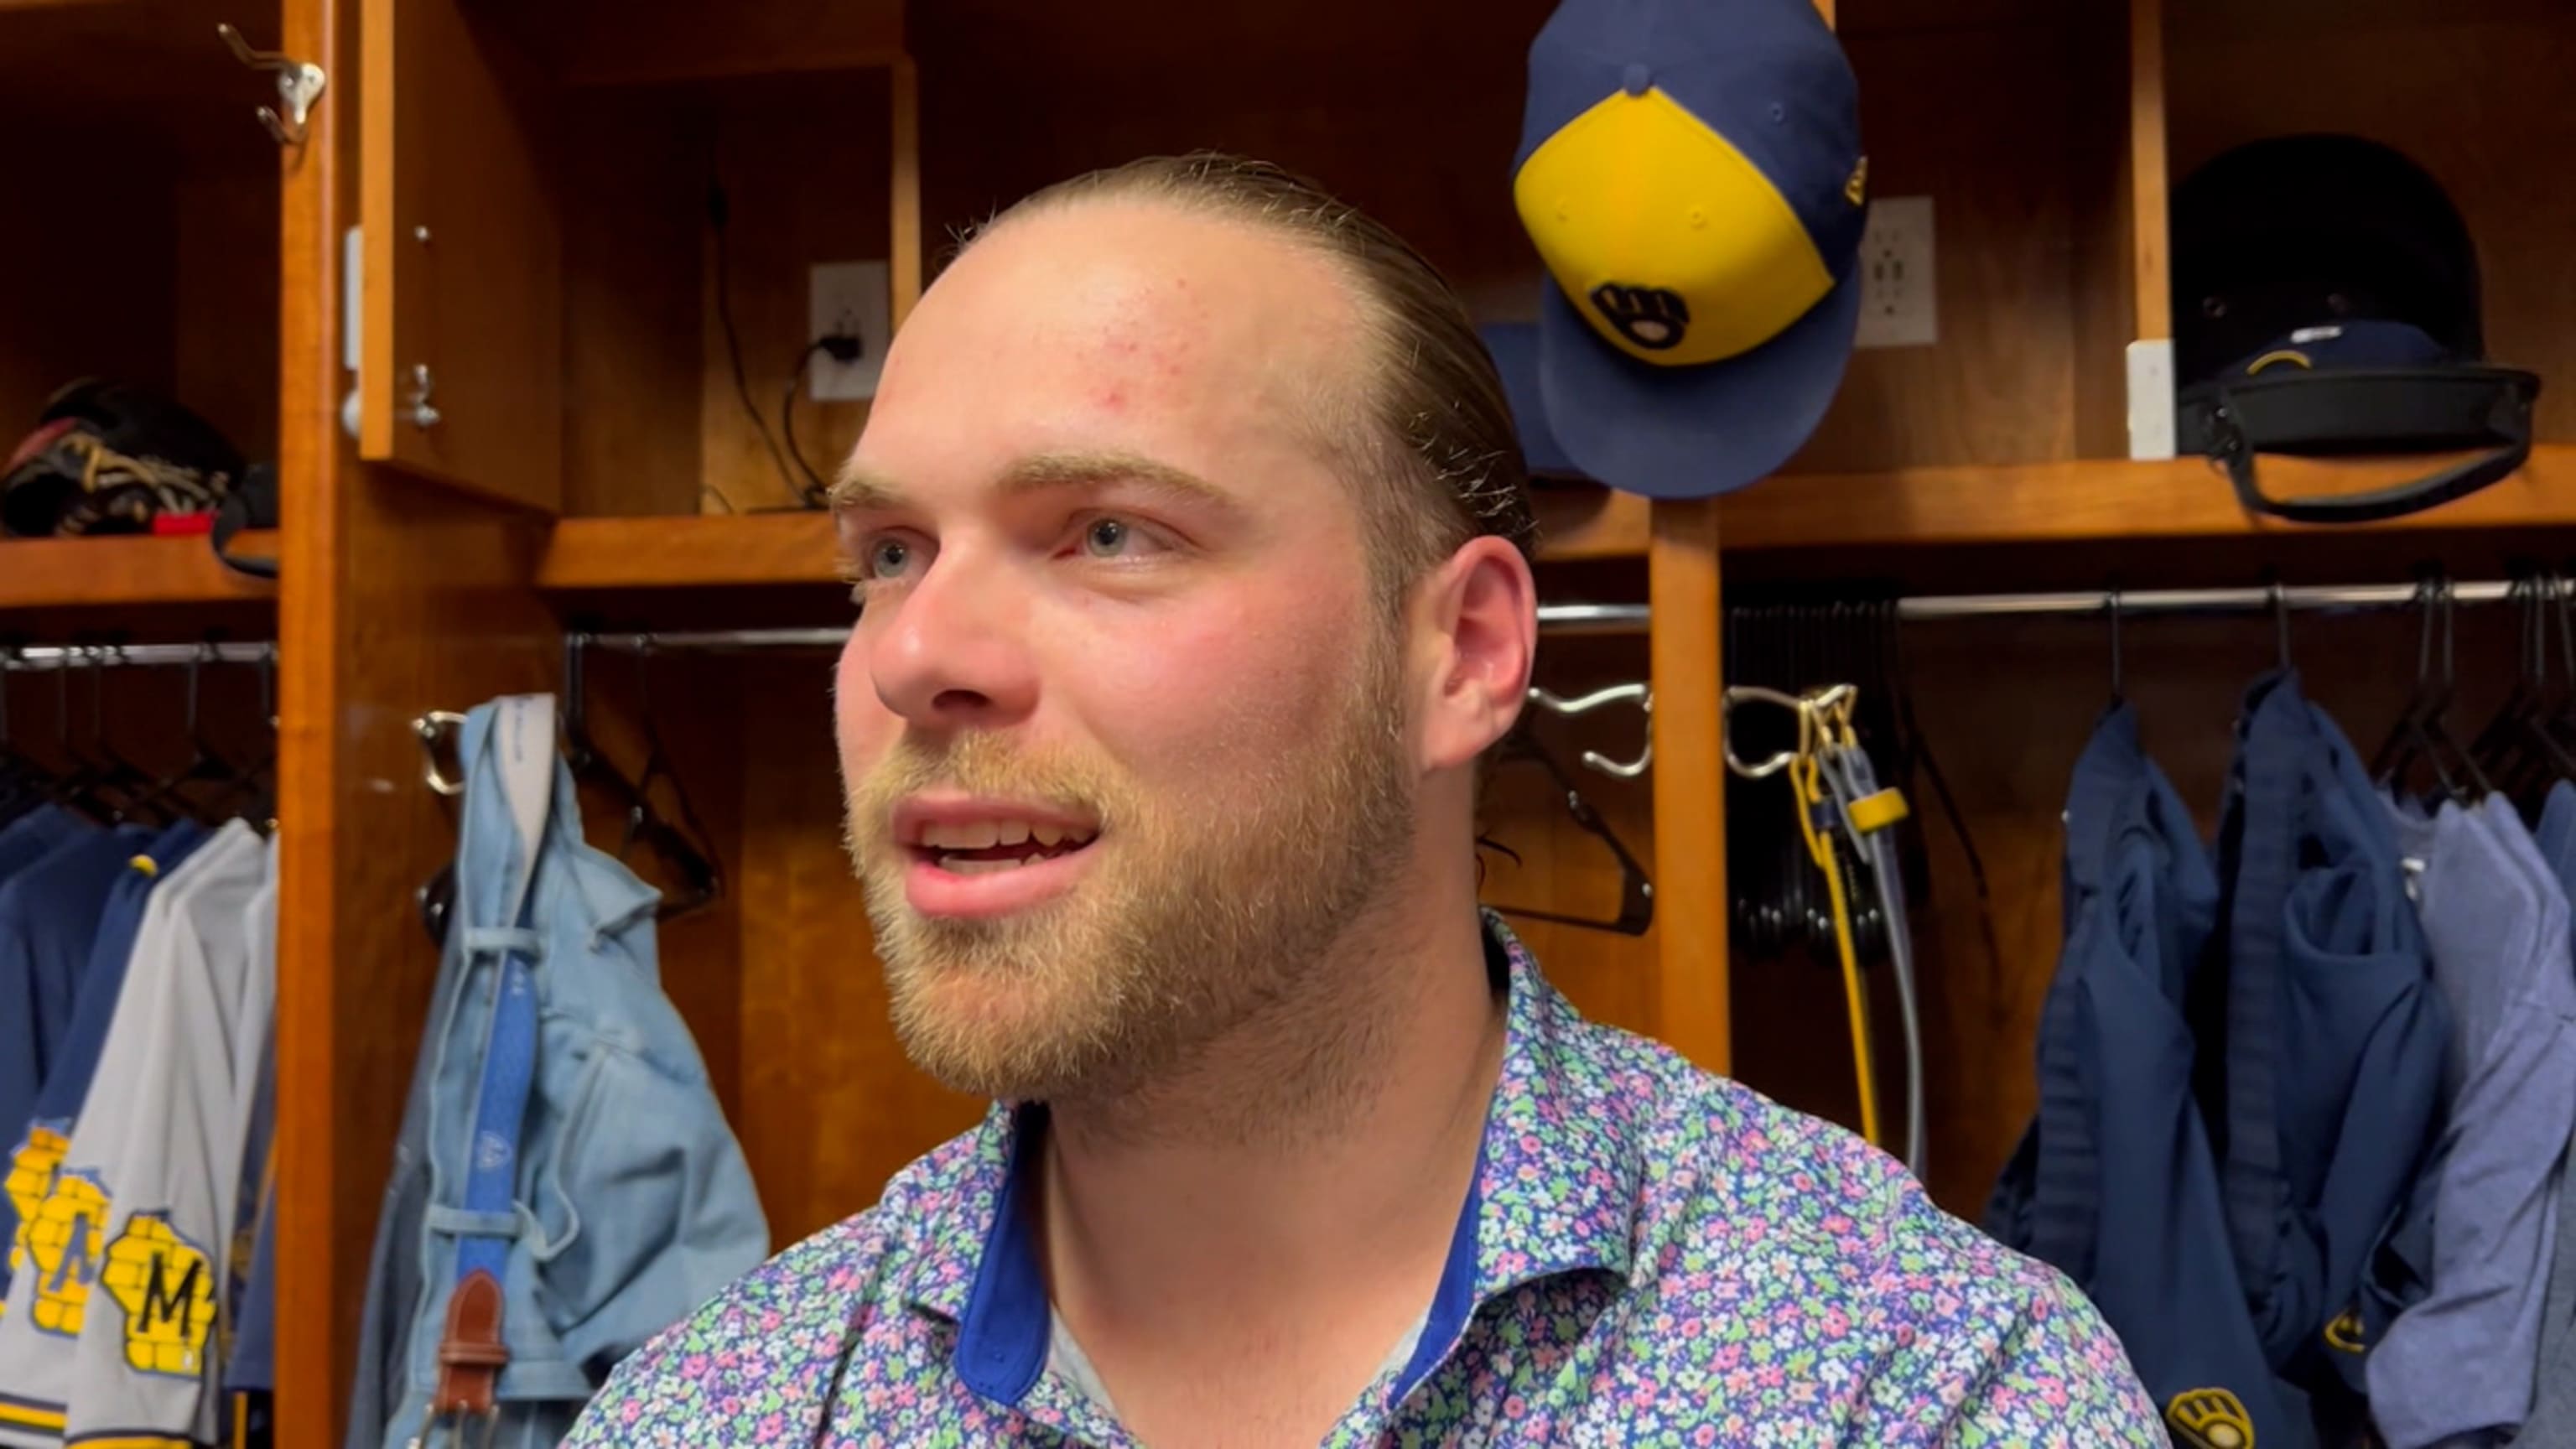 E85 - Corbin Burnes Ejected by DJ Reyburn After Continued Complaining of  Balls and Strikes 